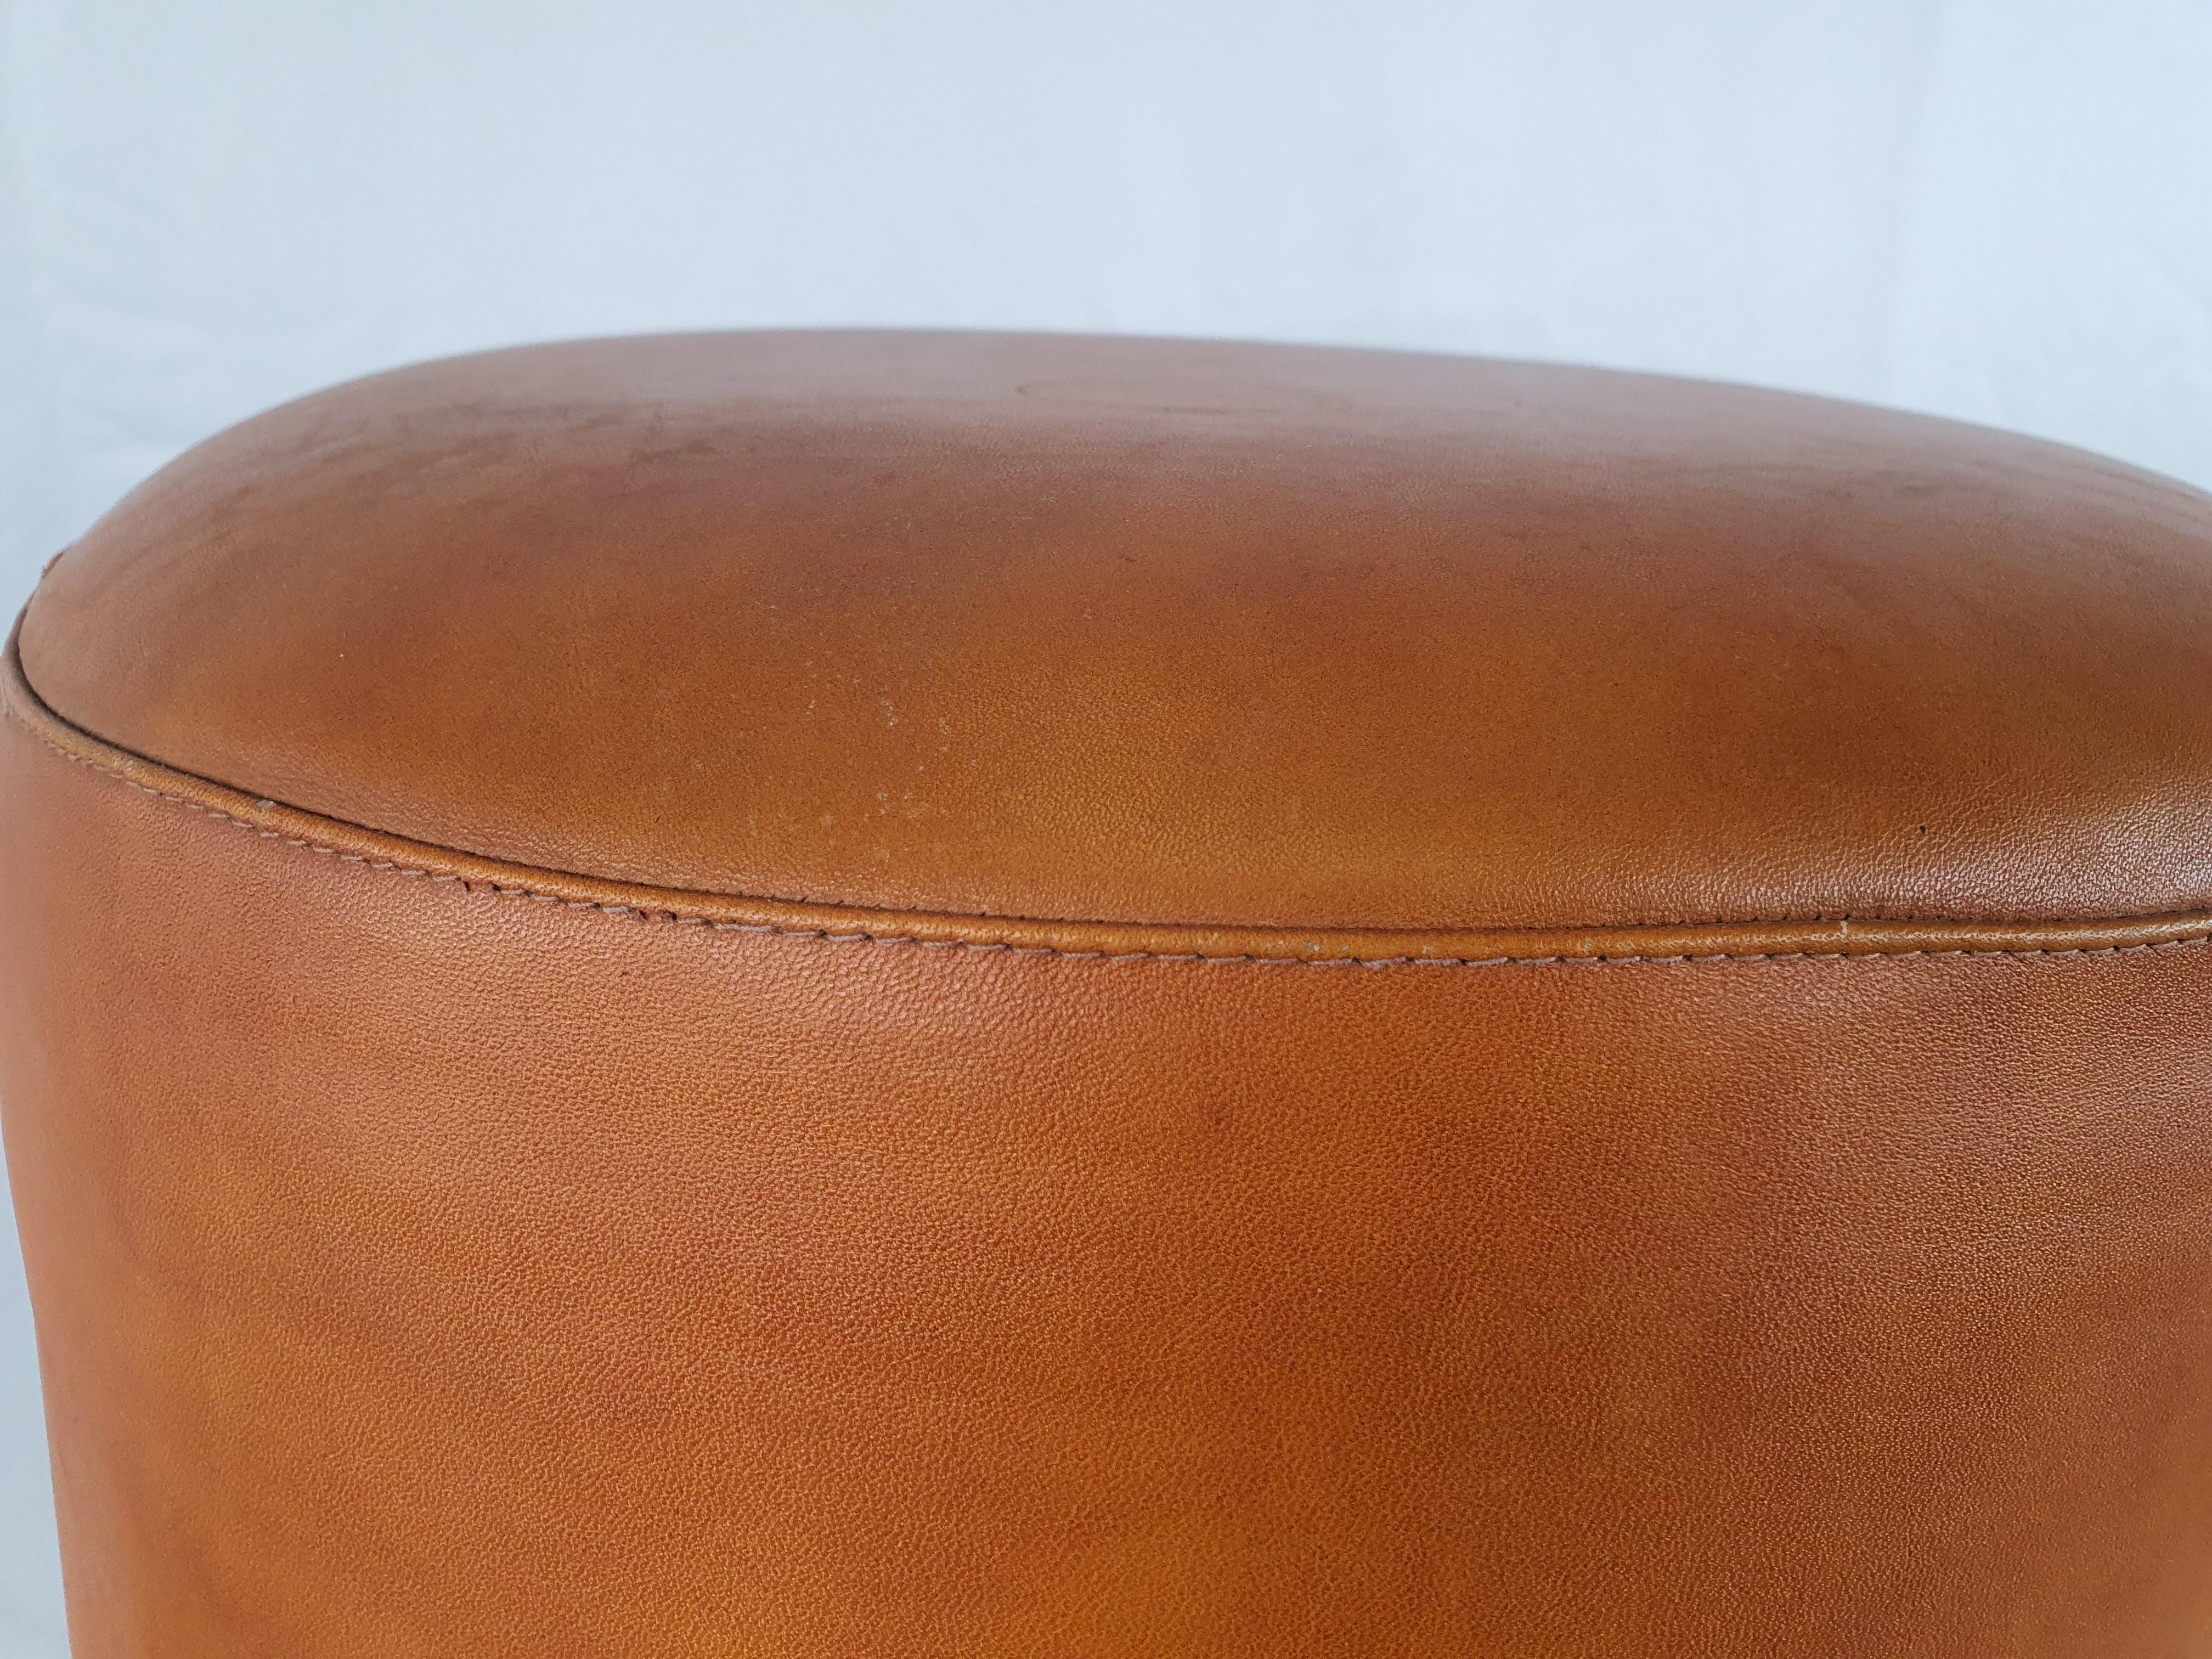 Late 20th Century Metal Stool with Orange Leather Seat from 1990s